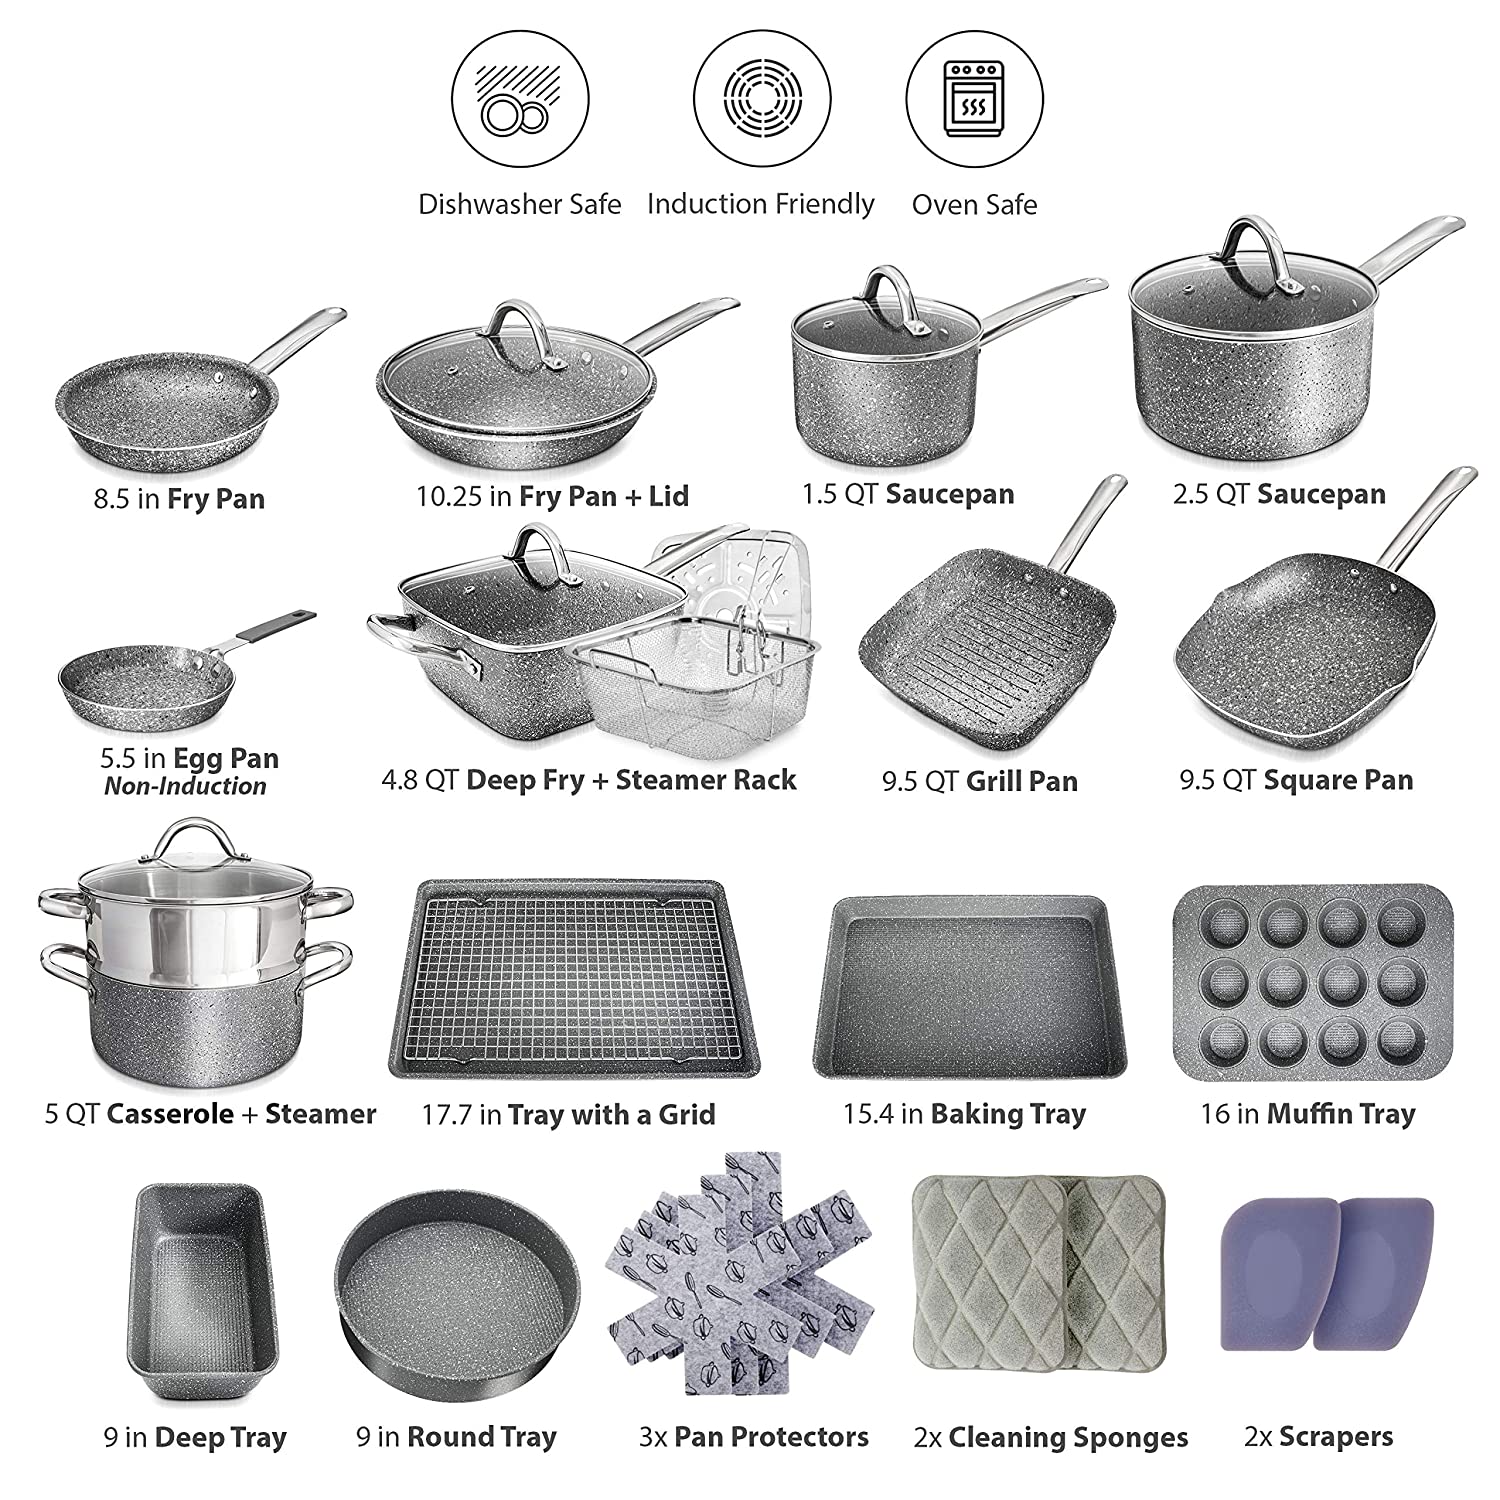  MICHELANGELO Pots and Pans Set 15 Piece, Ultra Nonstick Kitchen  Stone-Derived Coating Cookware Set with Utensil Set: Home & Kitchen